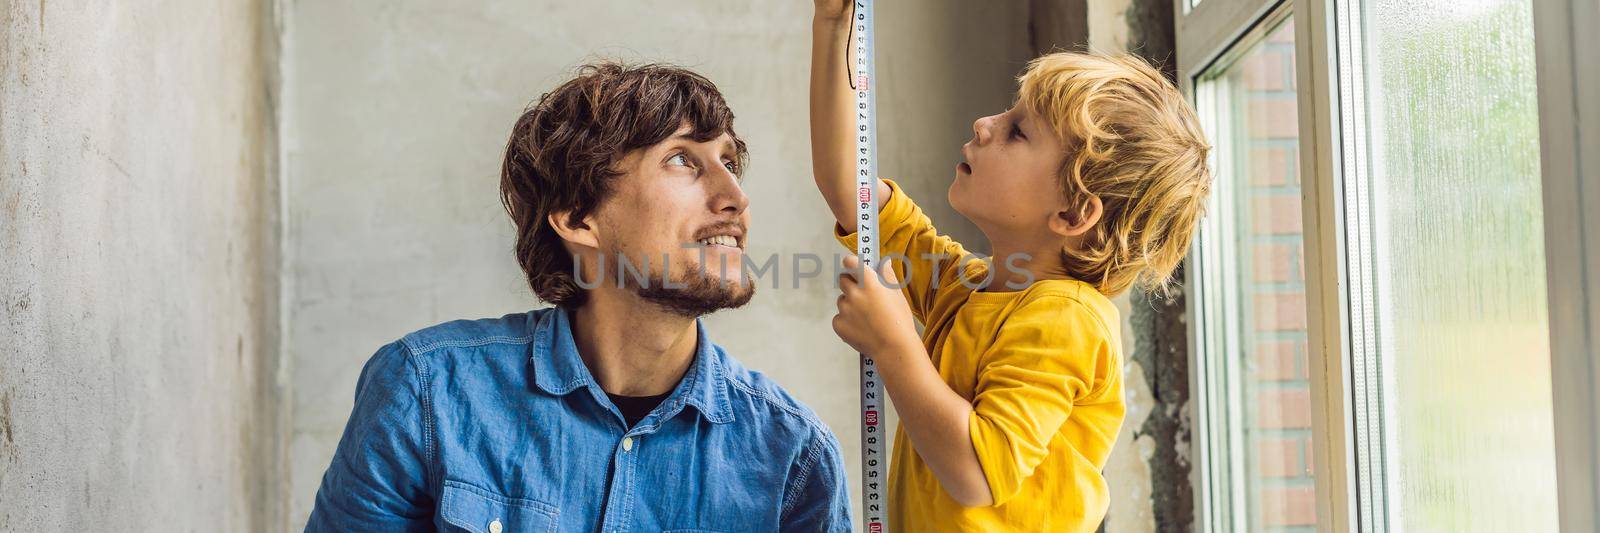 Father and son repair windows together. Repair the house yourself BANNER, LONG FORMAT by galitskaya